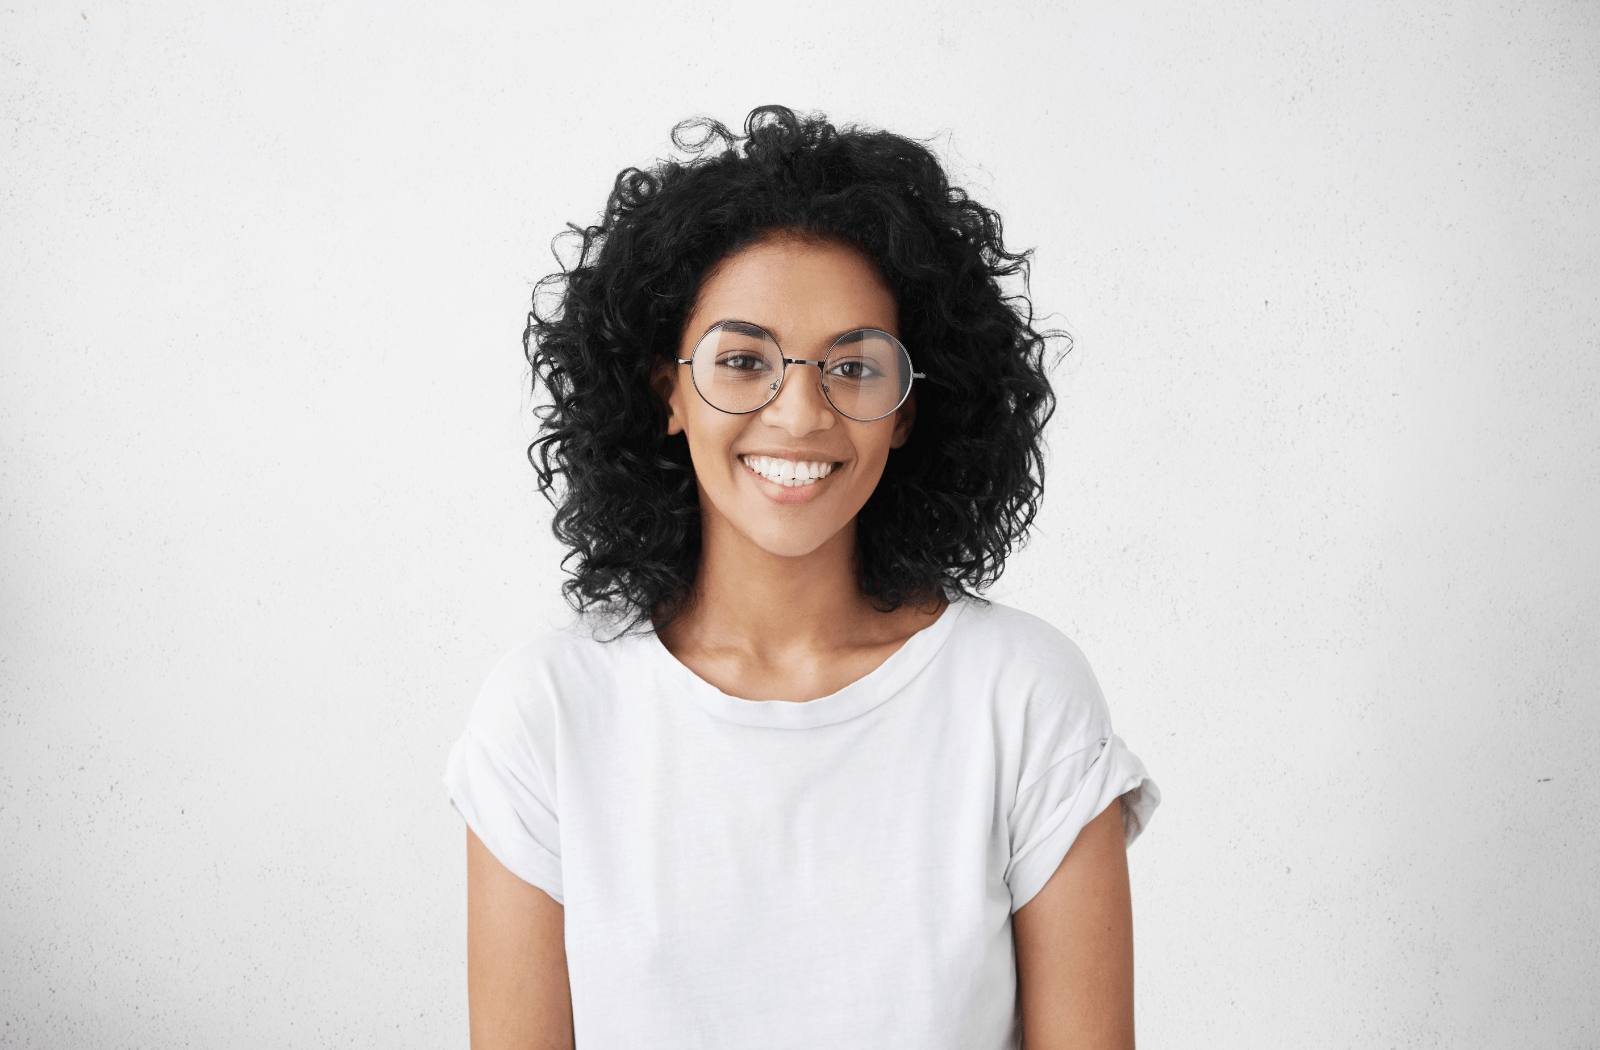 A young woman wearing prescription glasses smiling at the camera and standing against a white background